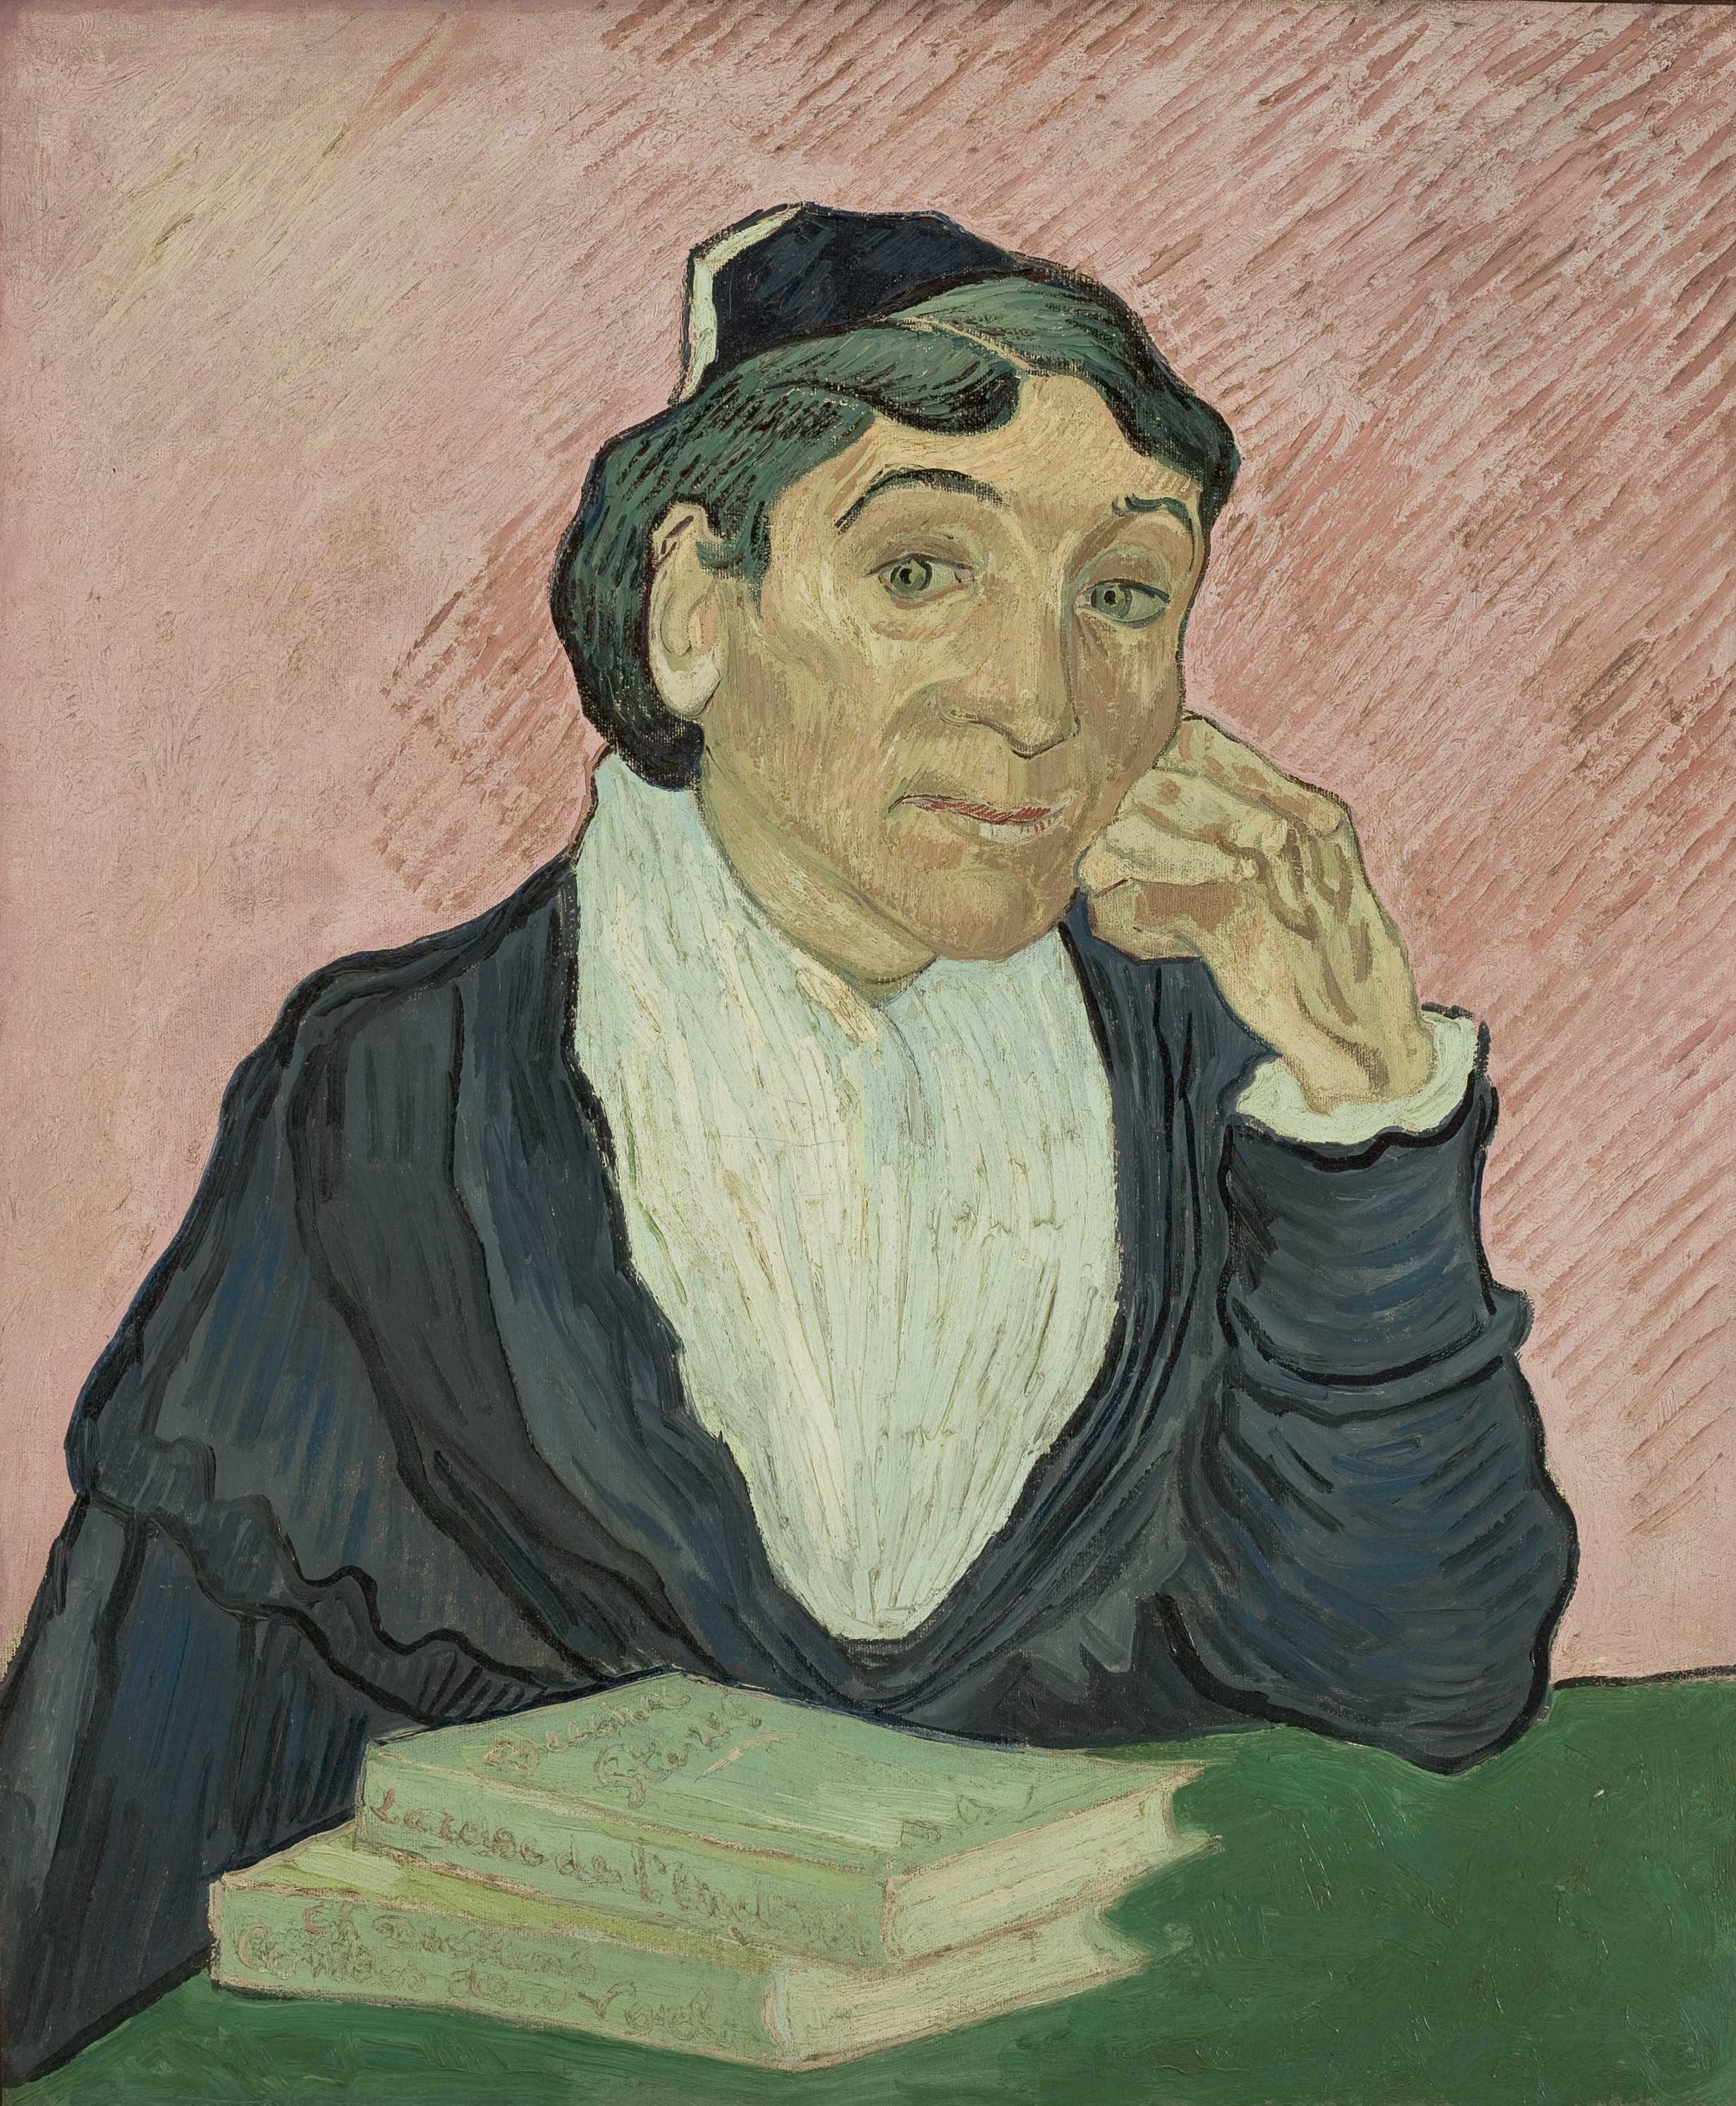 Van Gogh and Britain, Exhibition, Tate Britain, London: 27 March 2019 - 11 August 2019